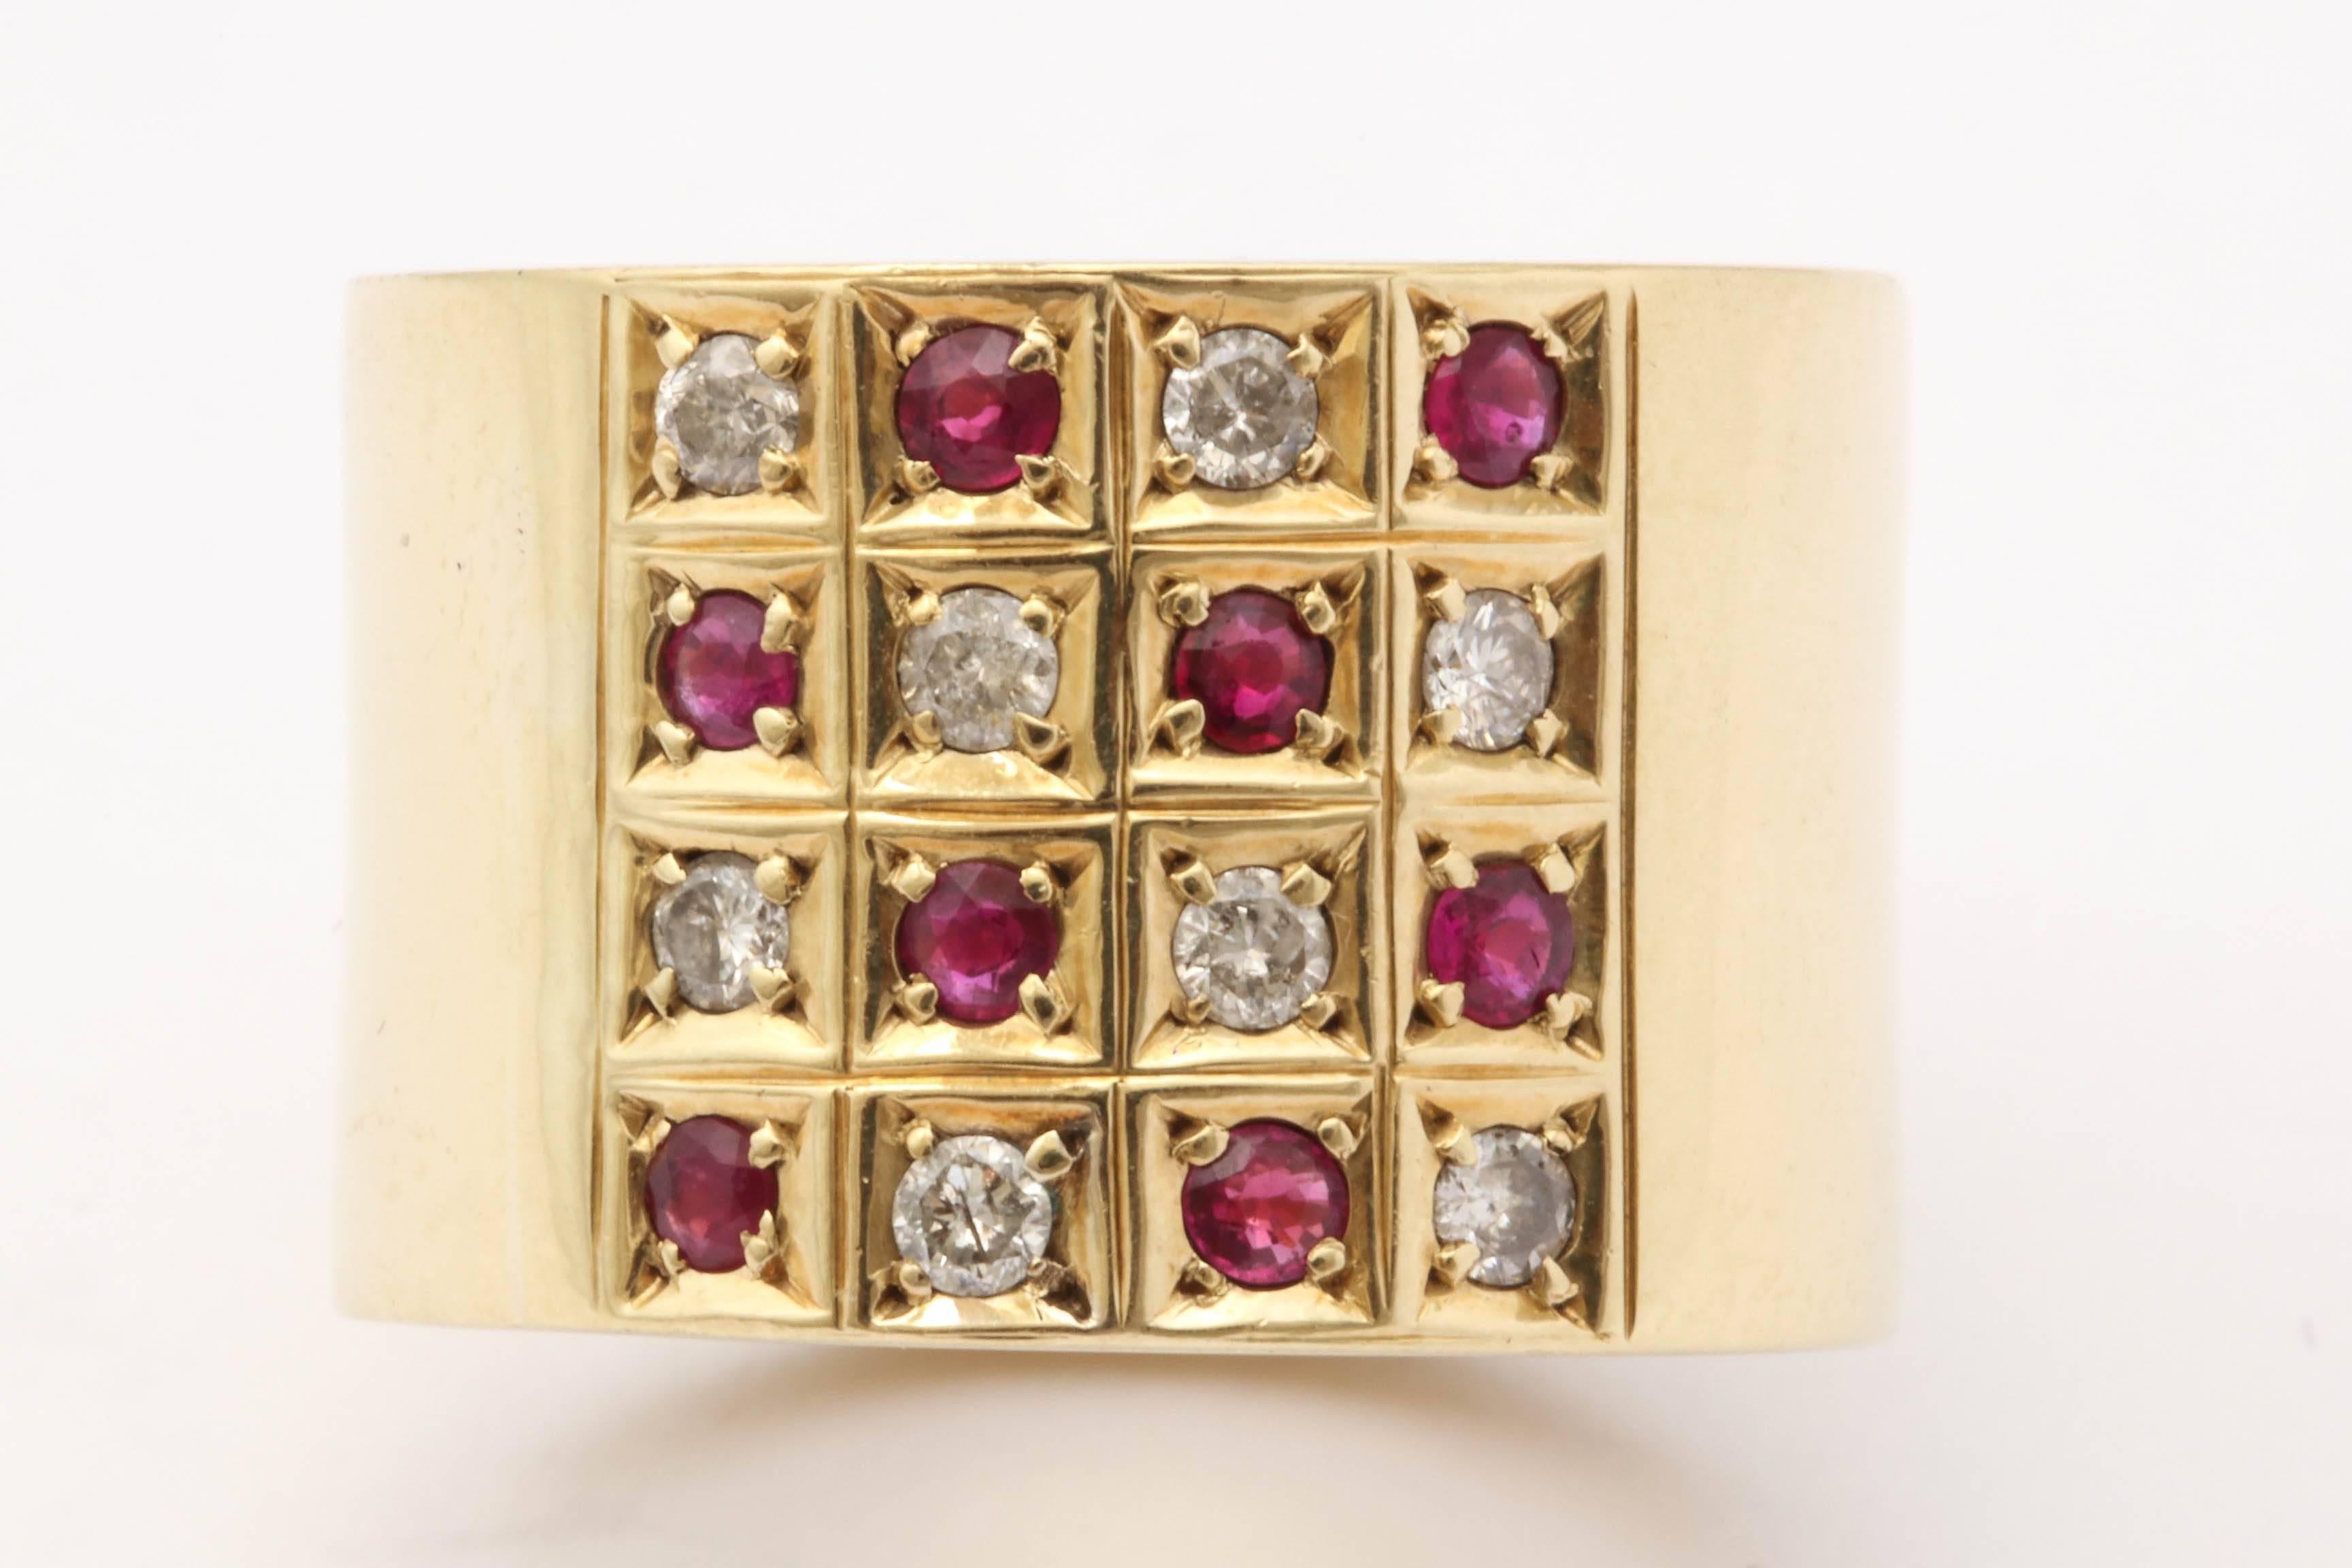 One Unisex Wide High Polish 18kt Yellow Gold Band Measuring 14MM Wide And With A Ring Size Of An American Size 7 And 1/2. Designed In A Checkerboard Motif And Embellishe With Eight Faceted Rubies And Eight Full Cut diamonds. Diamond Weight